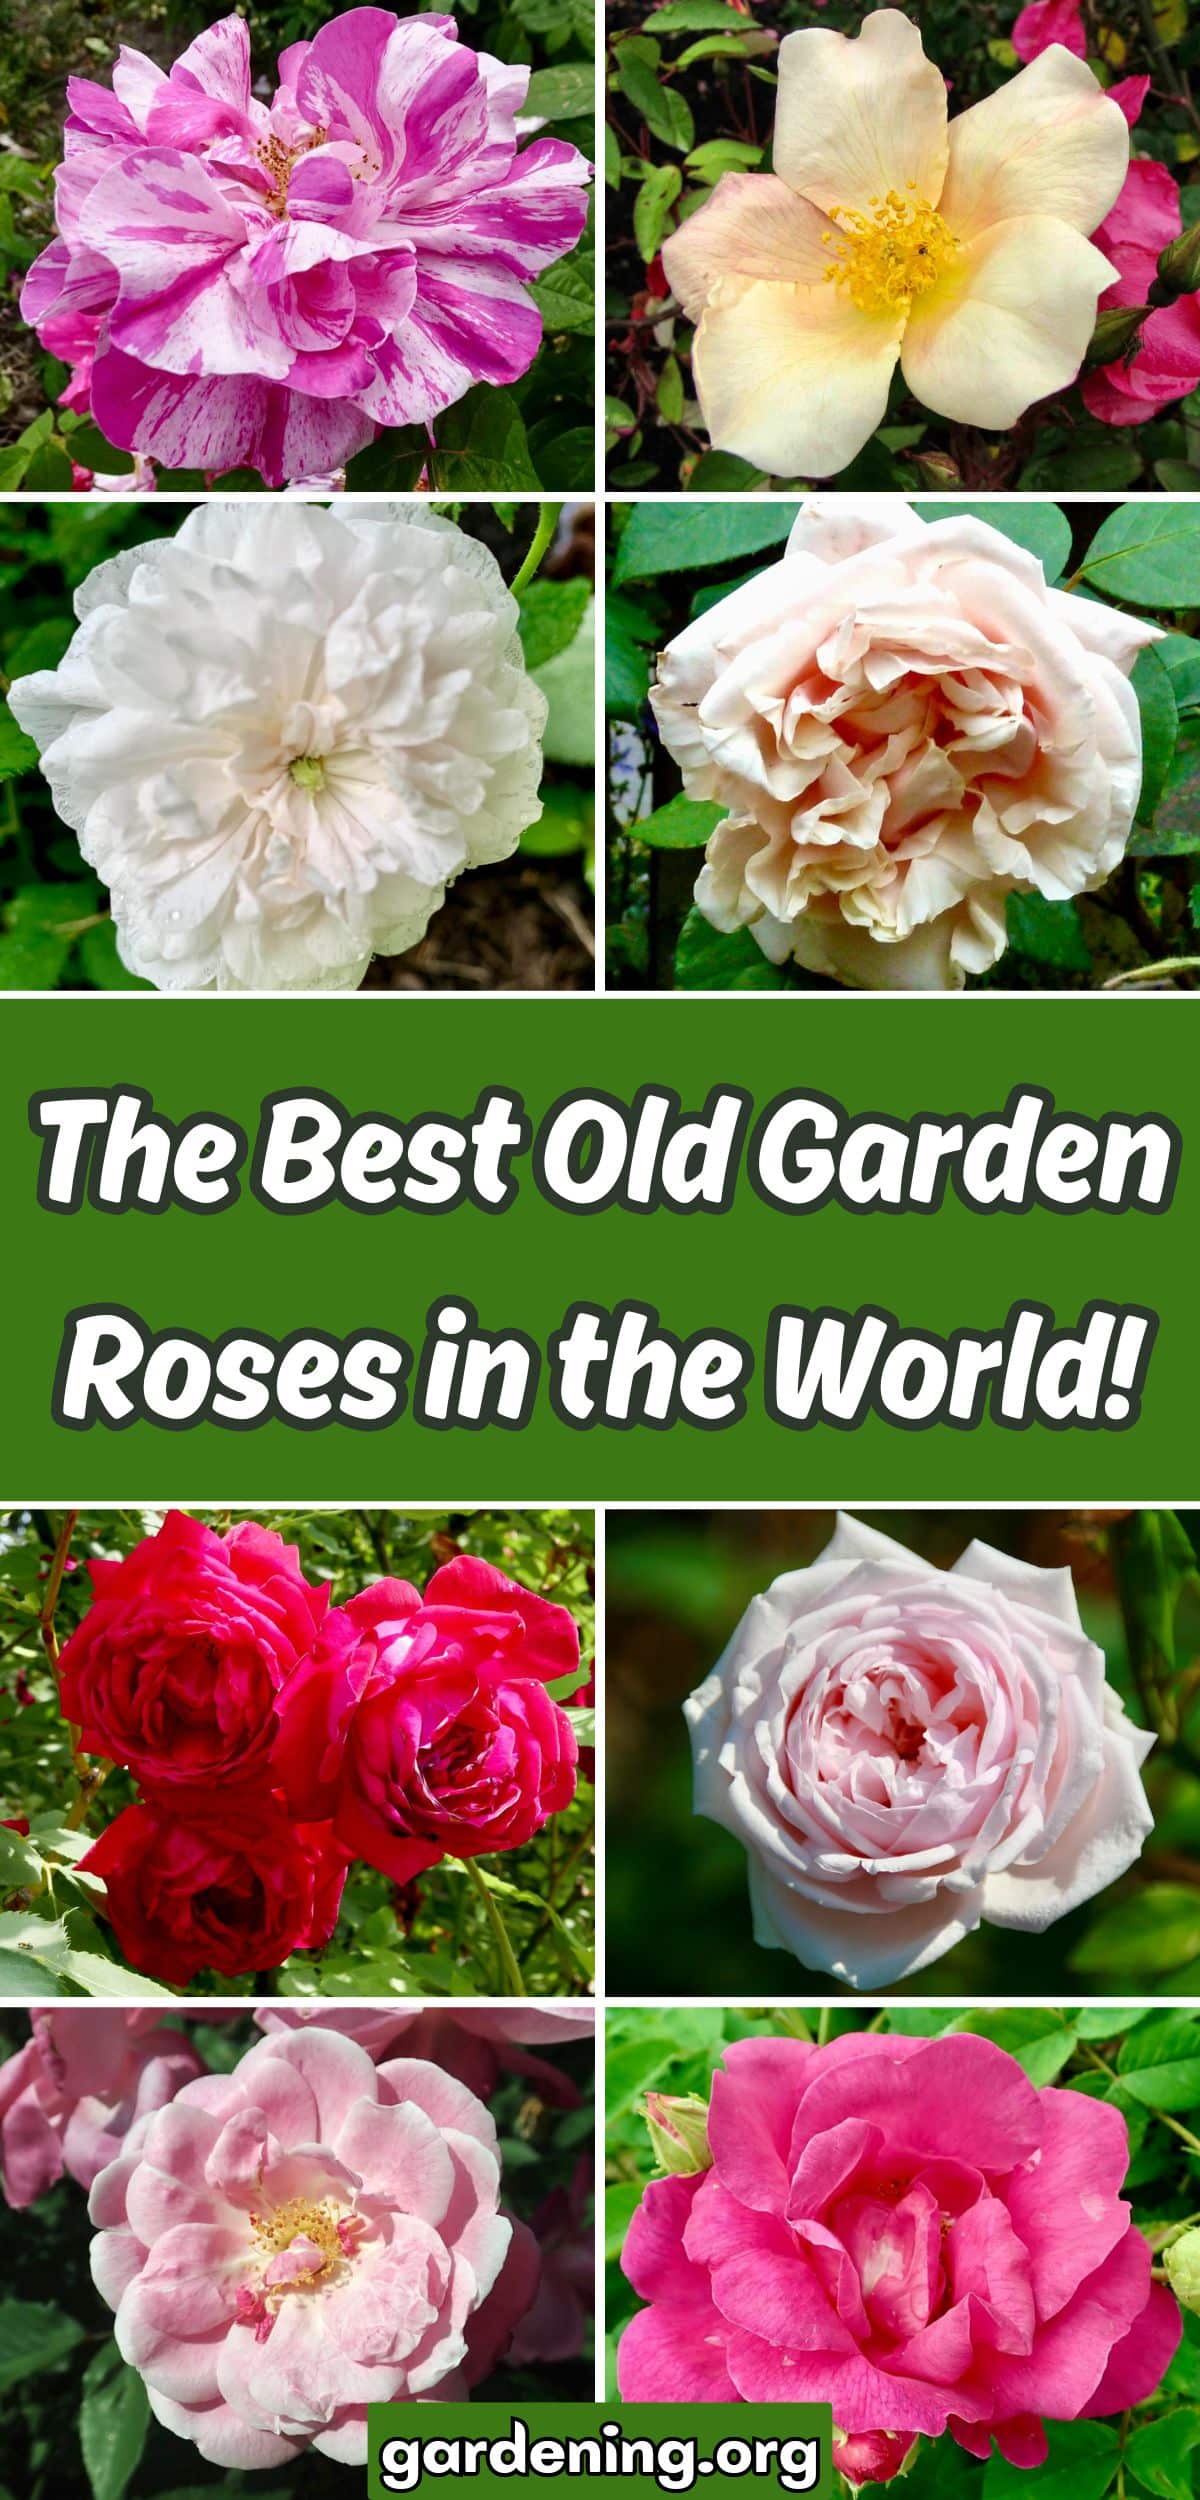 Rosarians Agree: These Are the Best Old Garden Roses in the World! collage.